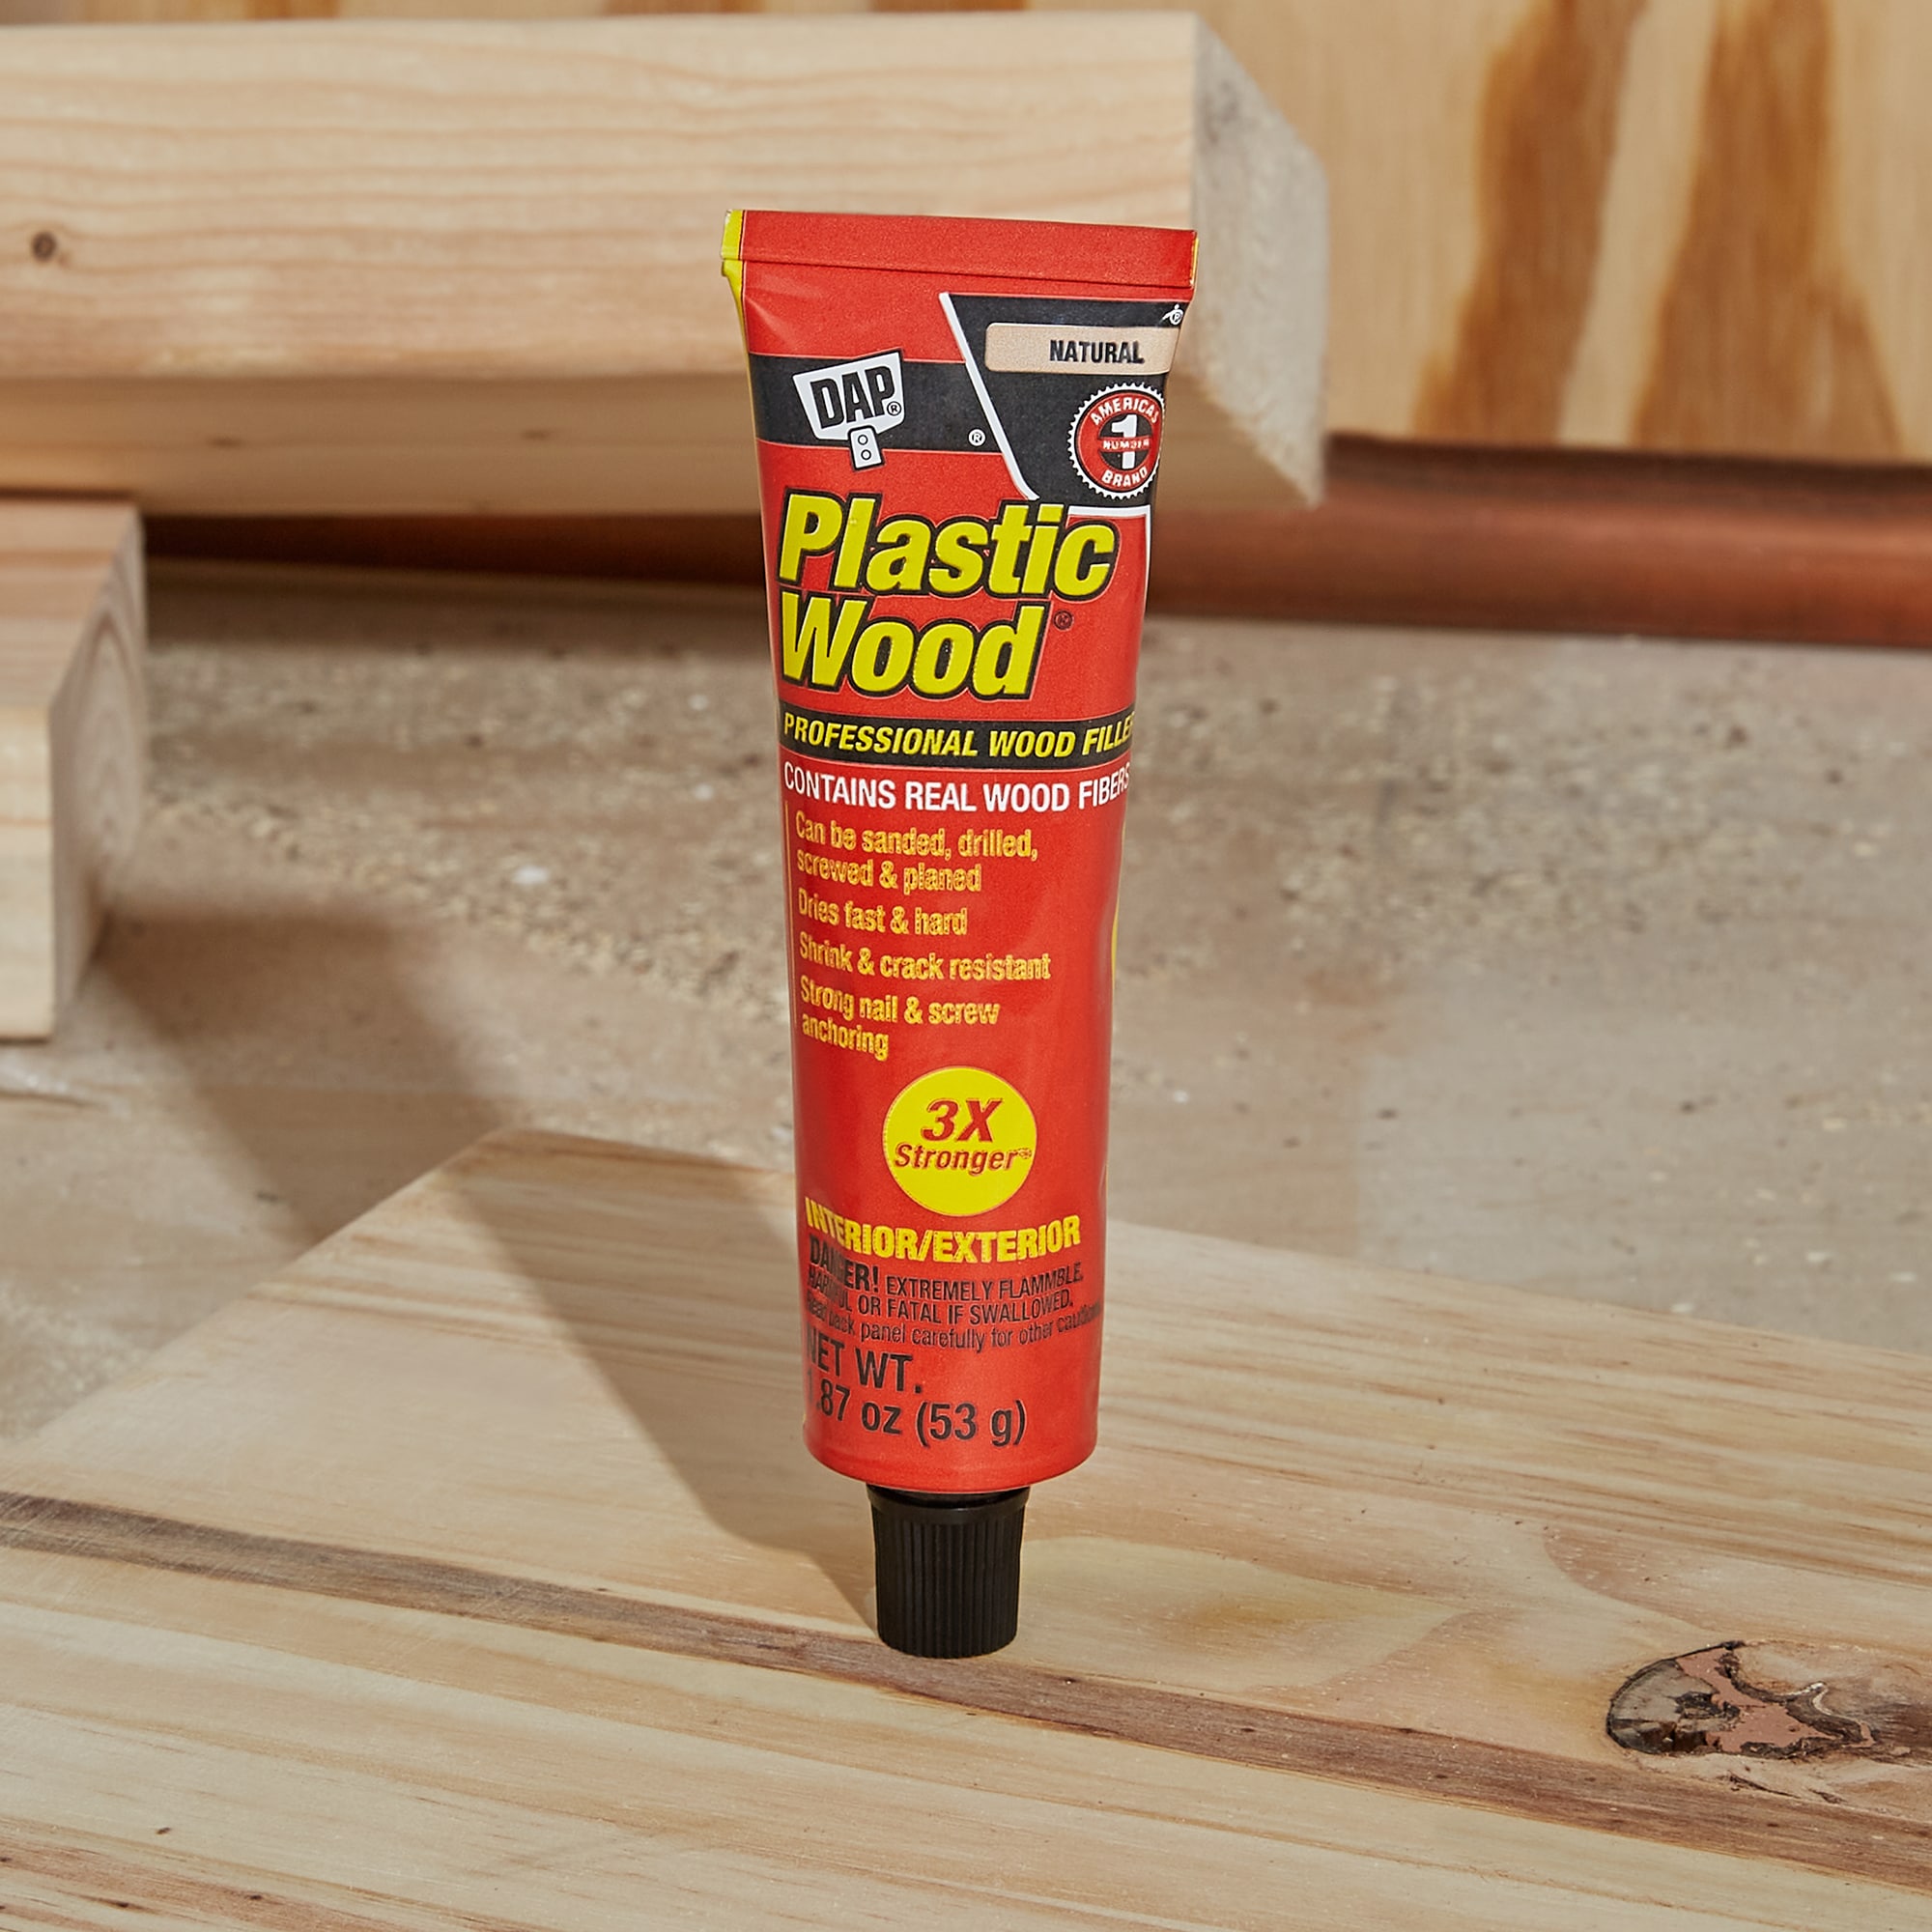 Dap Plastic Wood-X 5.5 Oz. All Purpose Wood Filler with DryDex Dry